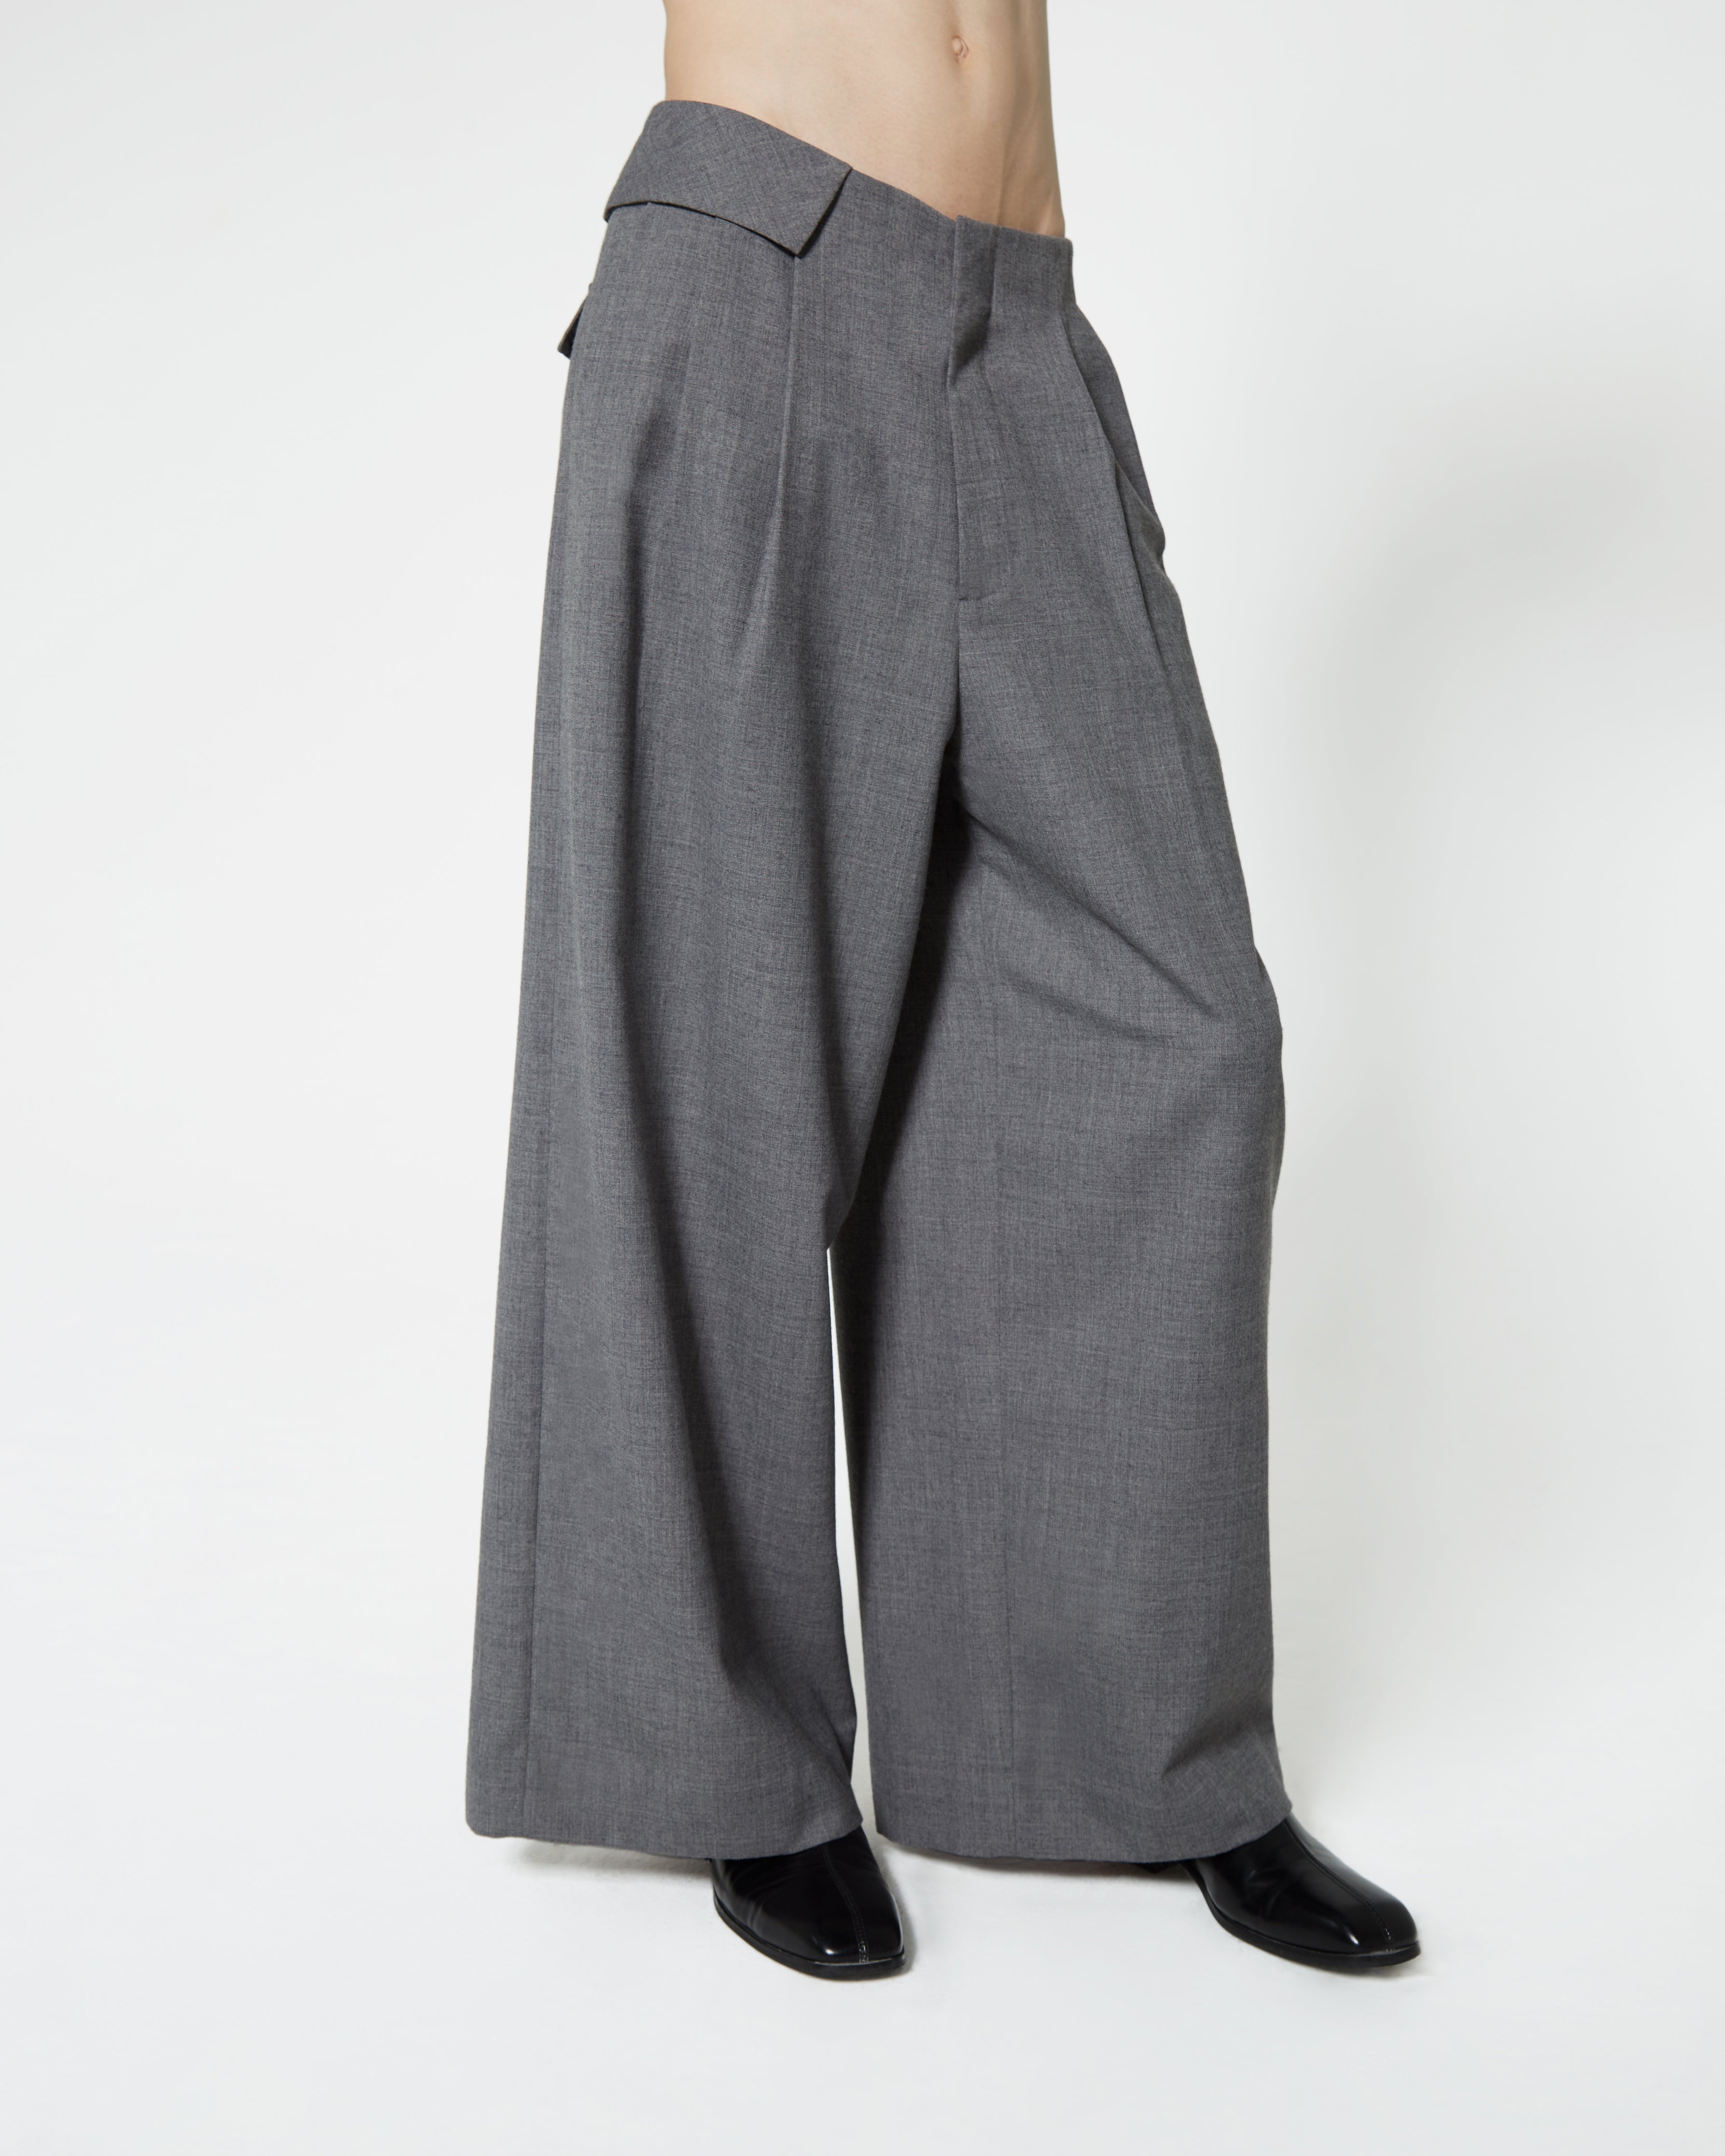 Woolen Grey Low-Waist and Wide-Leg Pants with White Stitching Details